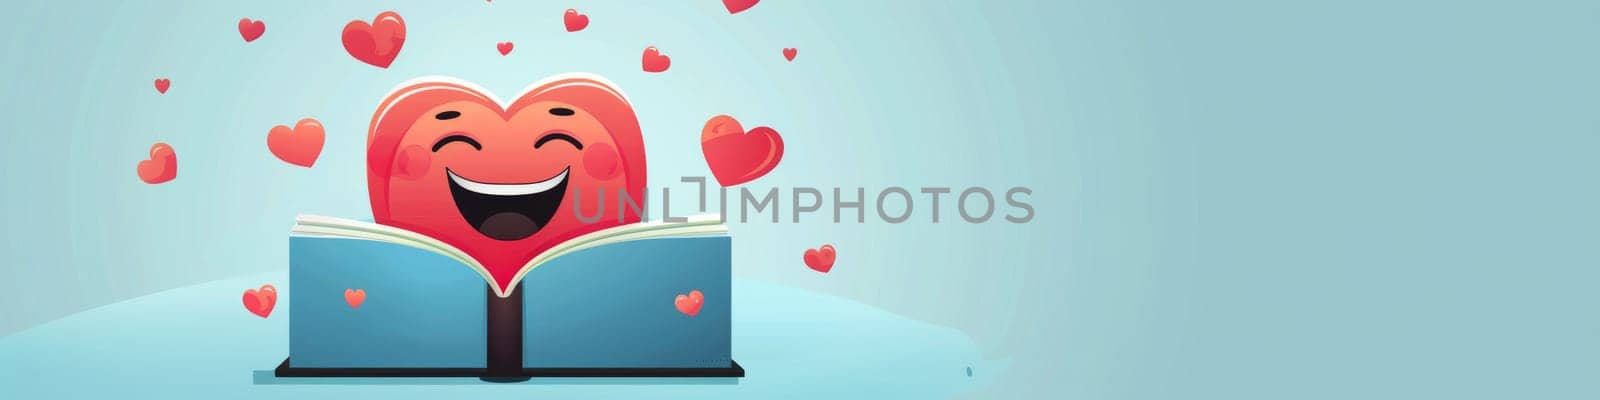 Happy, laughing book with heart icons around on a pastel blue background with copy space, read a book lover